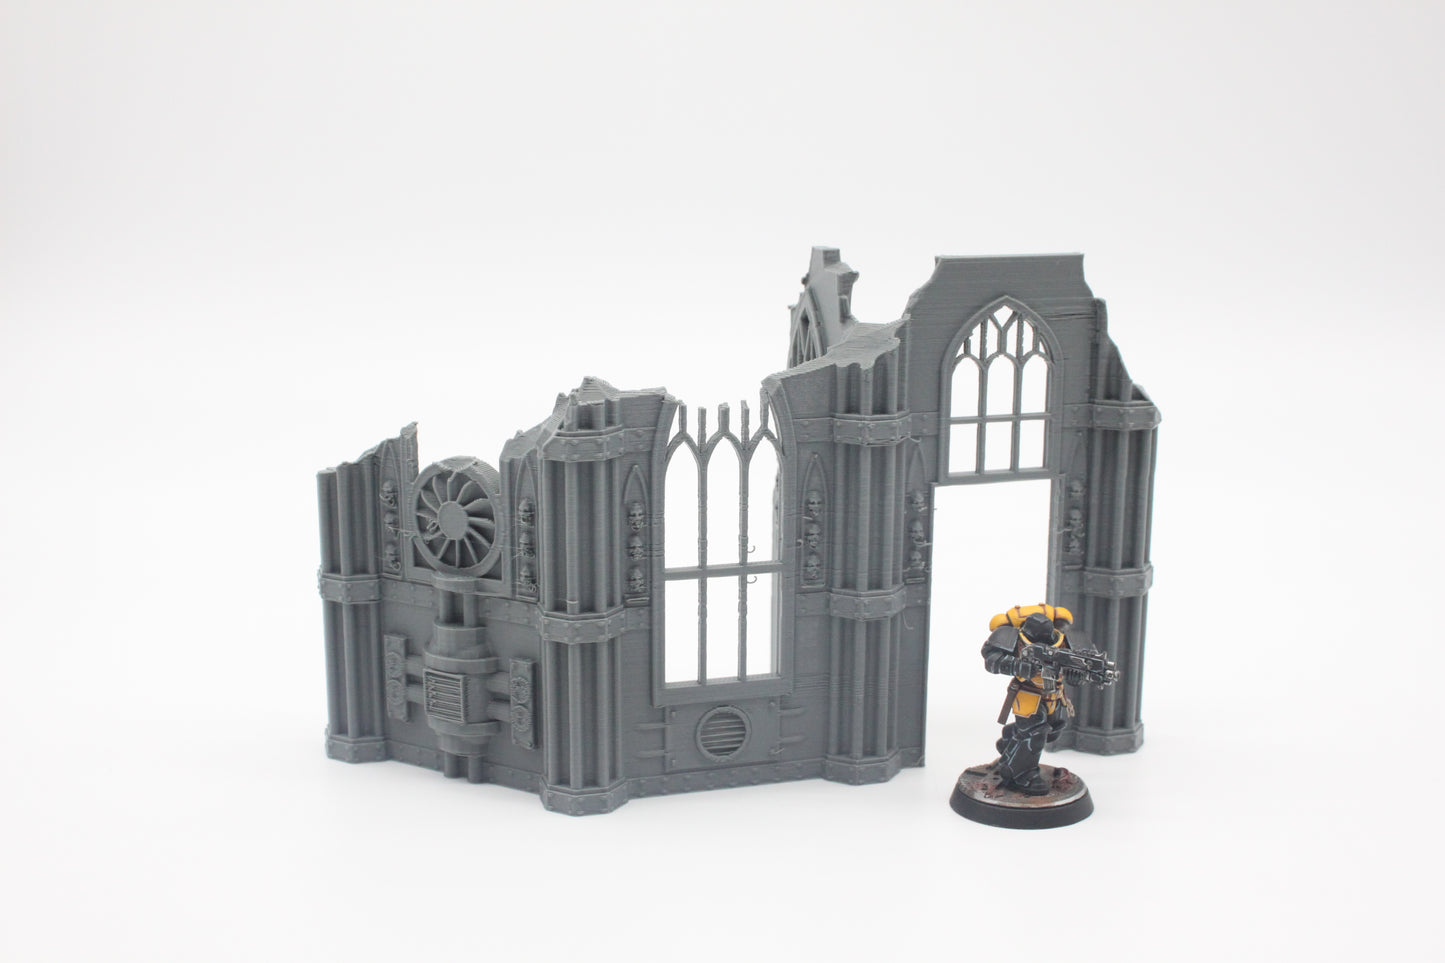 Bundle of Gothic Ruined Buildings